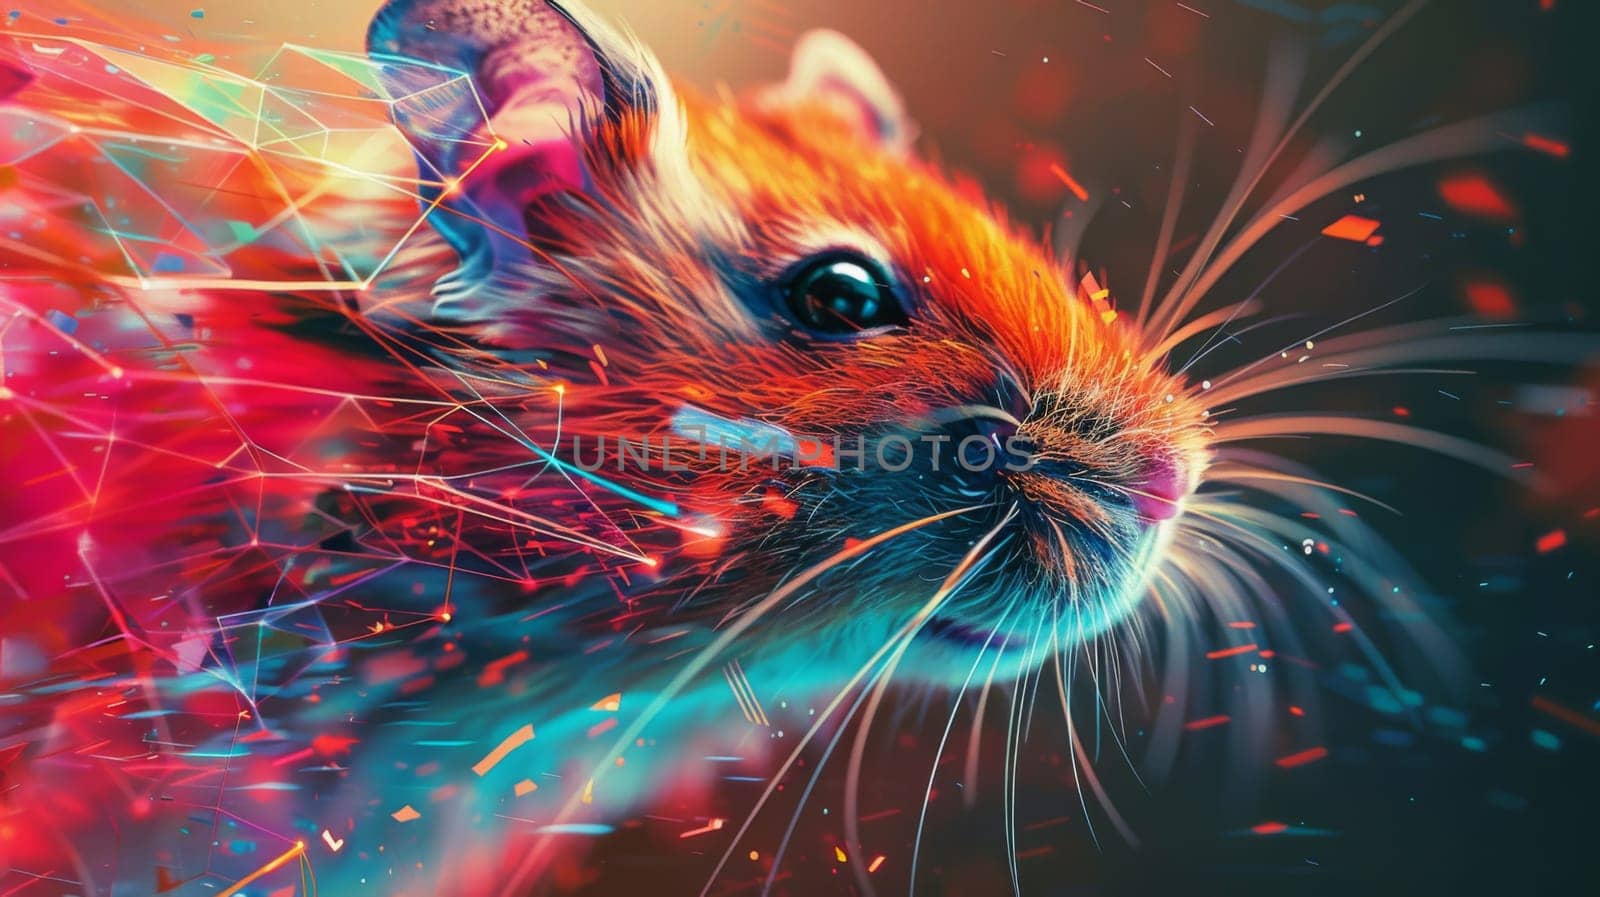 A close up of a colorful rodent with many colored particles